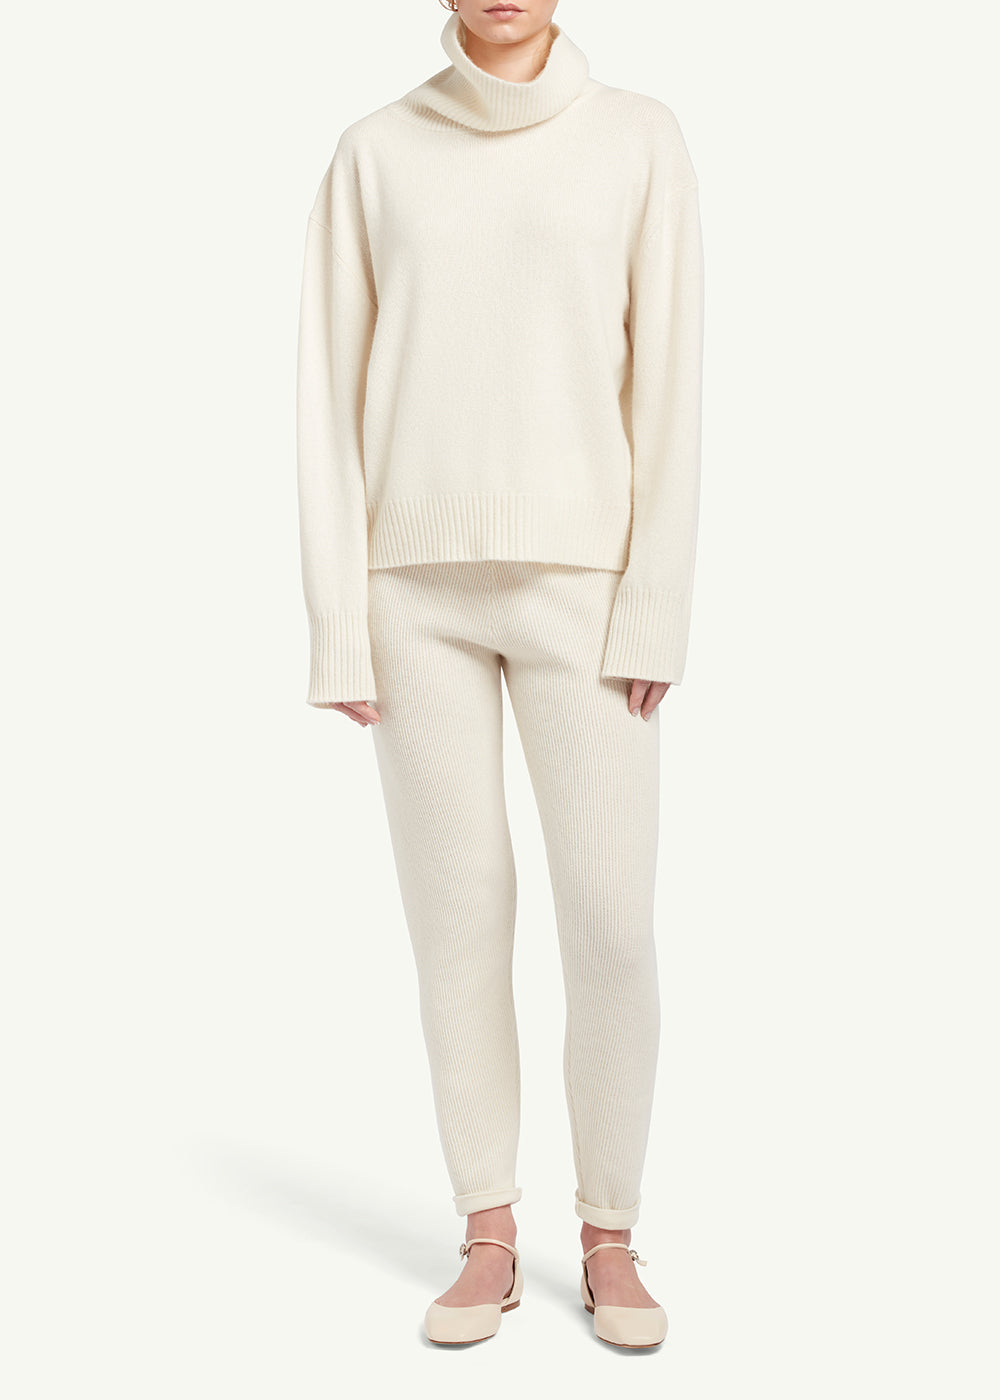 Moss Rollneck Jumper - One Size / Ivory